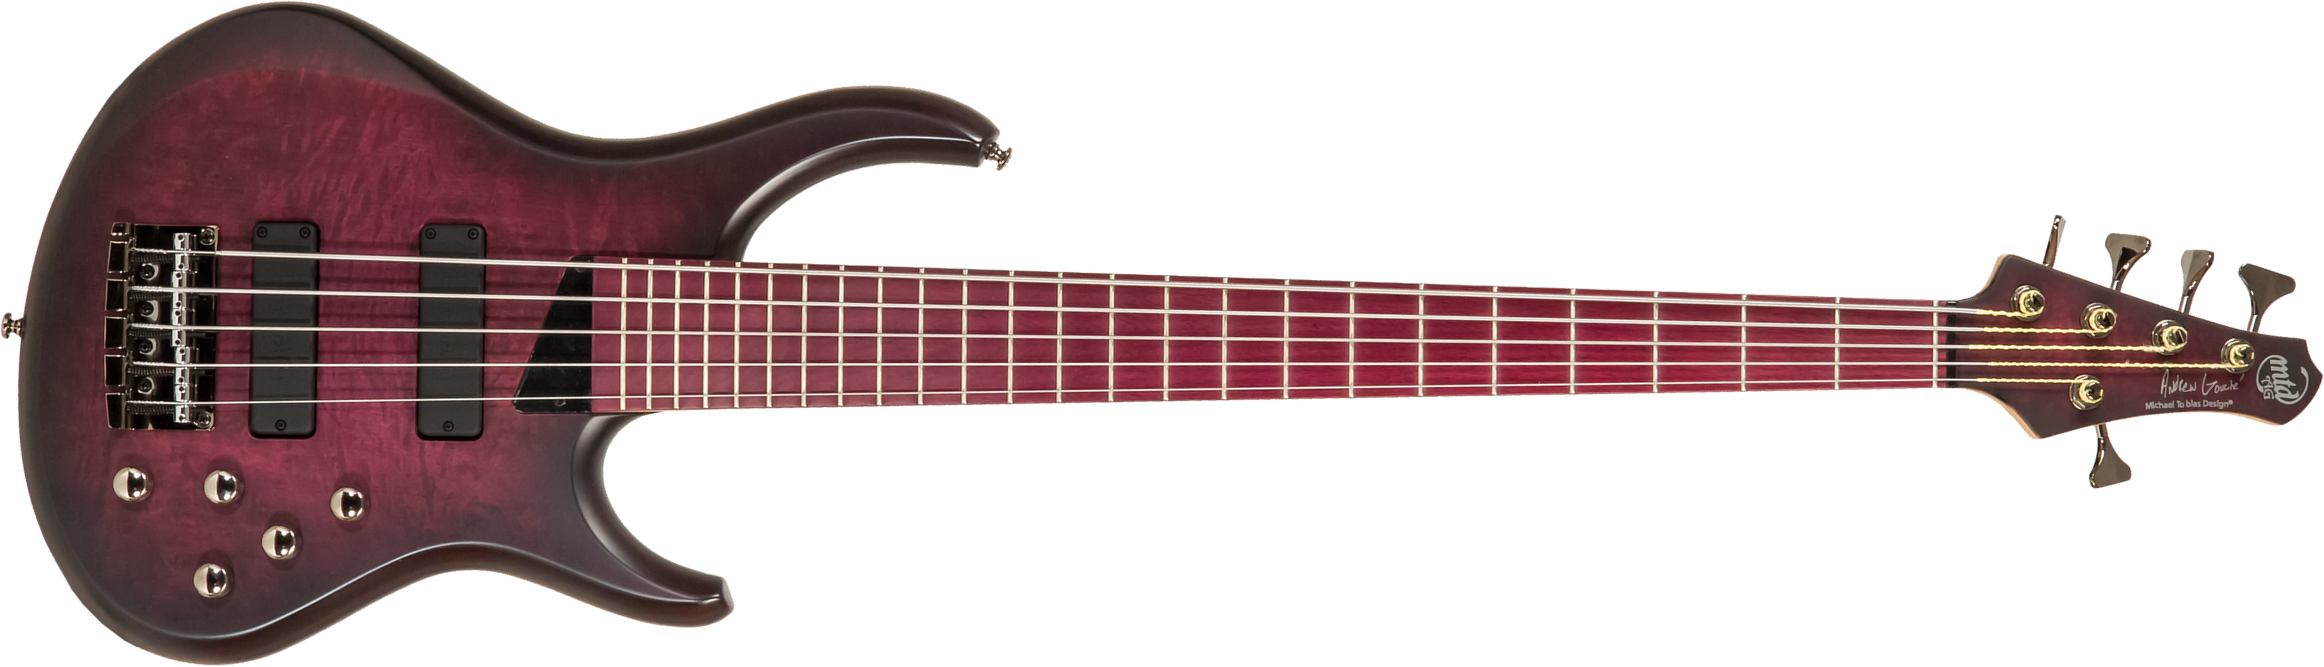 Mtd Andrew Gouche Kag5ph-ag Kingston Signature 5c Active Bartolini Pur - Ag Burst - Solid body electric bass - Main picture